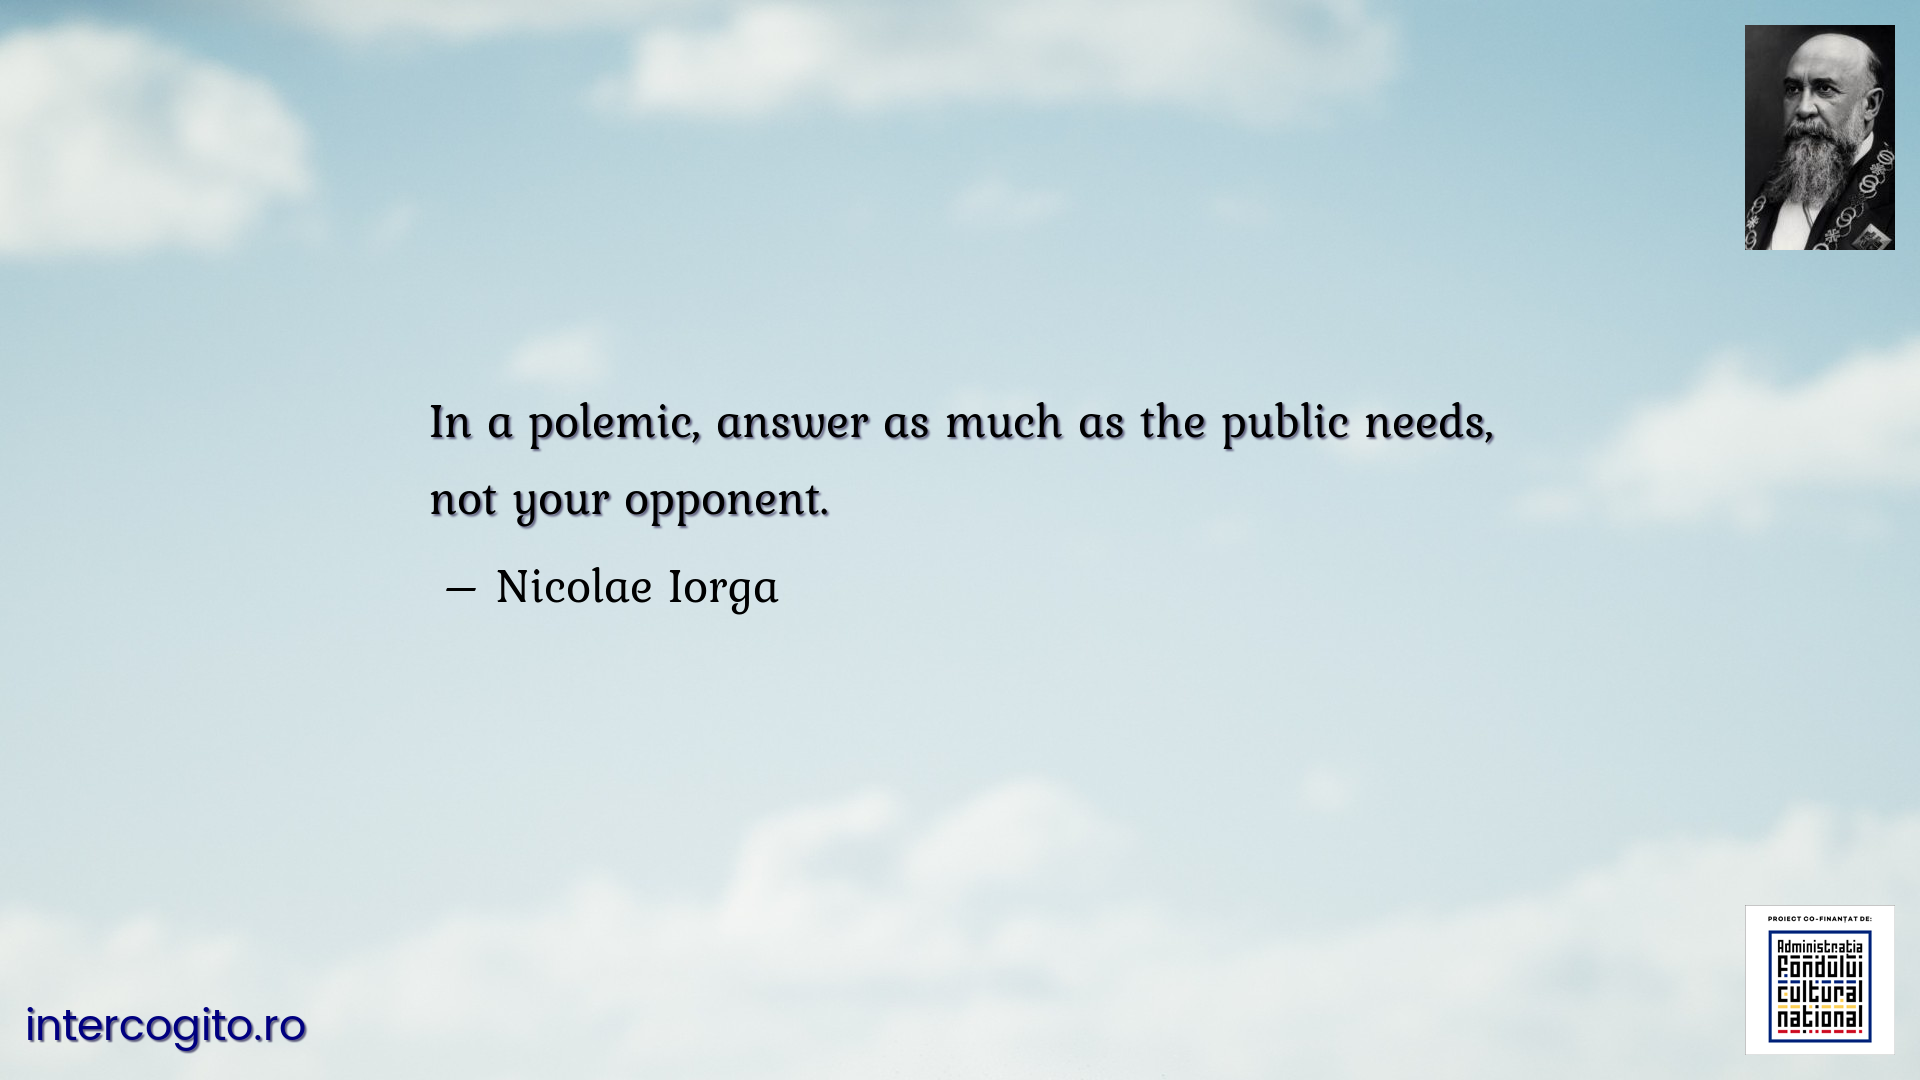 In a polemic, answer as much as the public needs, not your opponent.